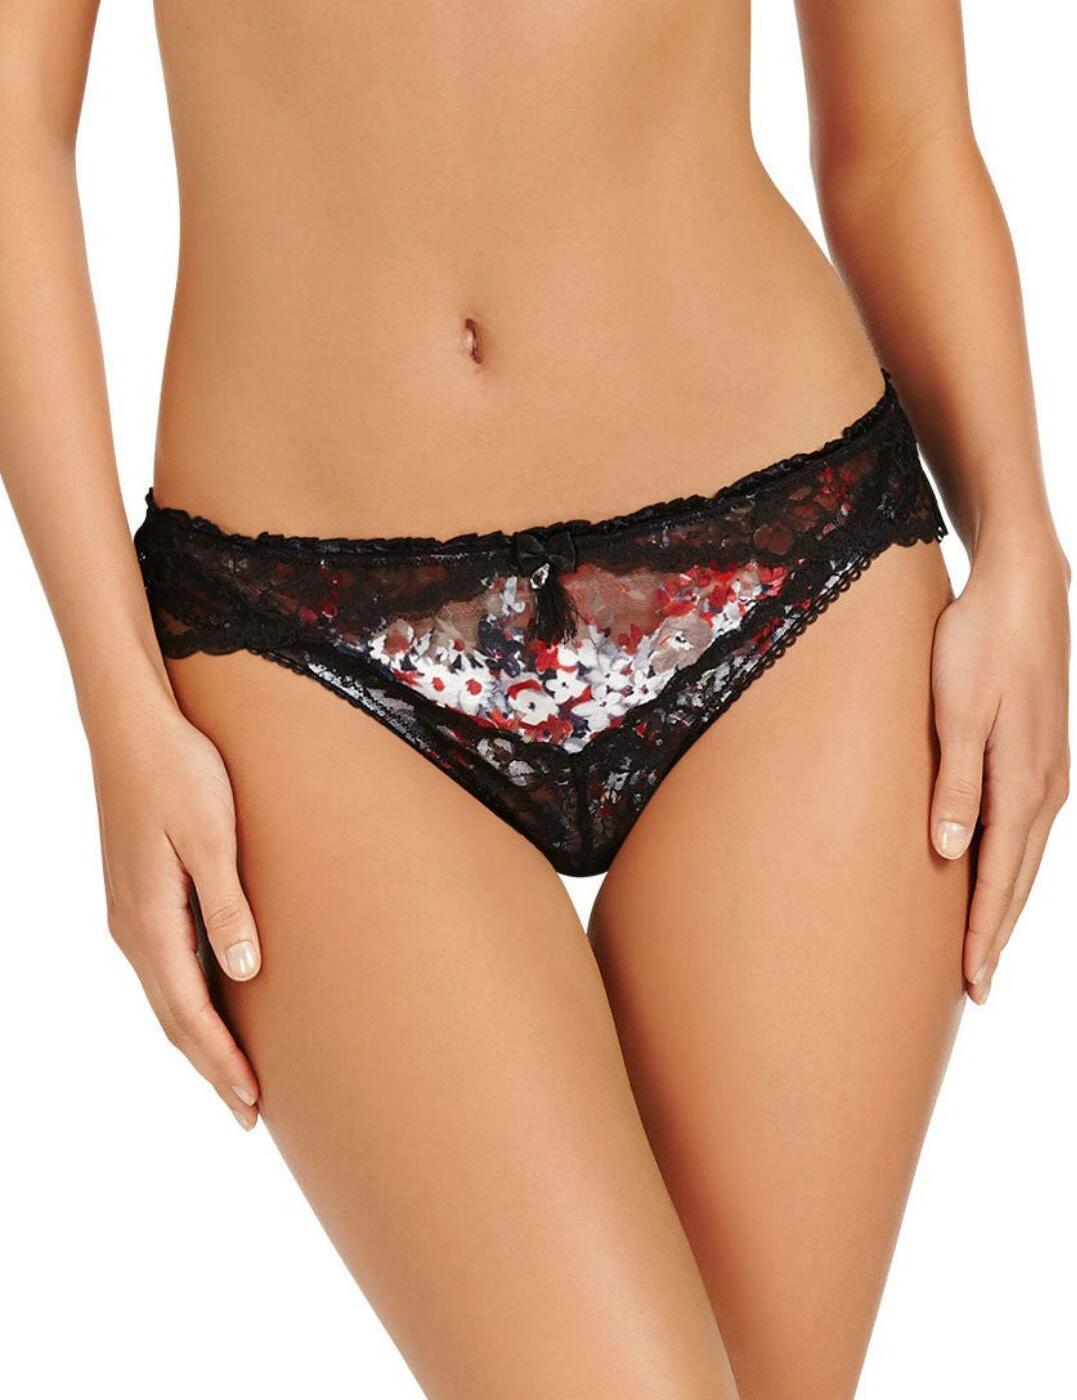 P37-1277 Pleasure State Couture Lola Josephine Thong - P37-1277 Red Floral